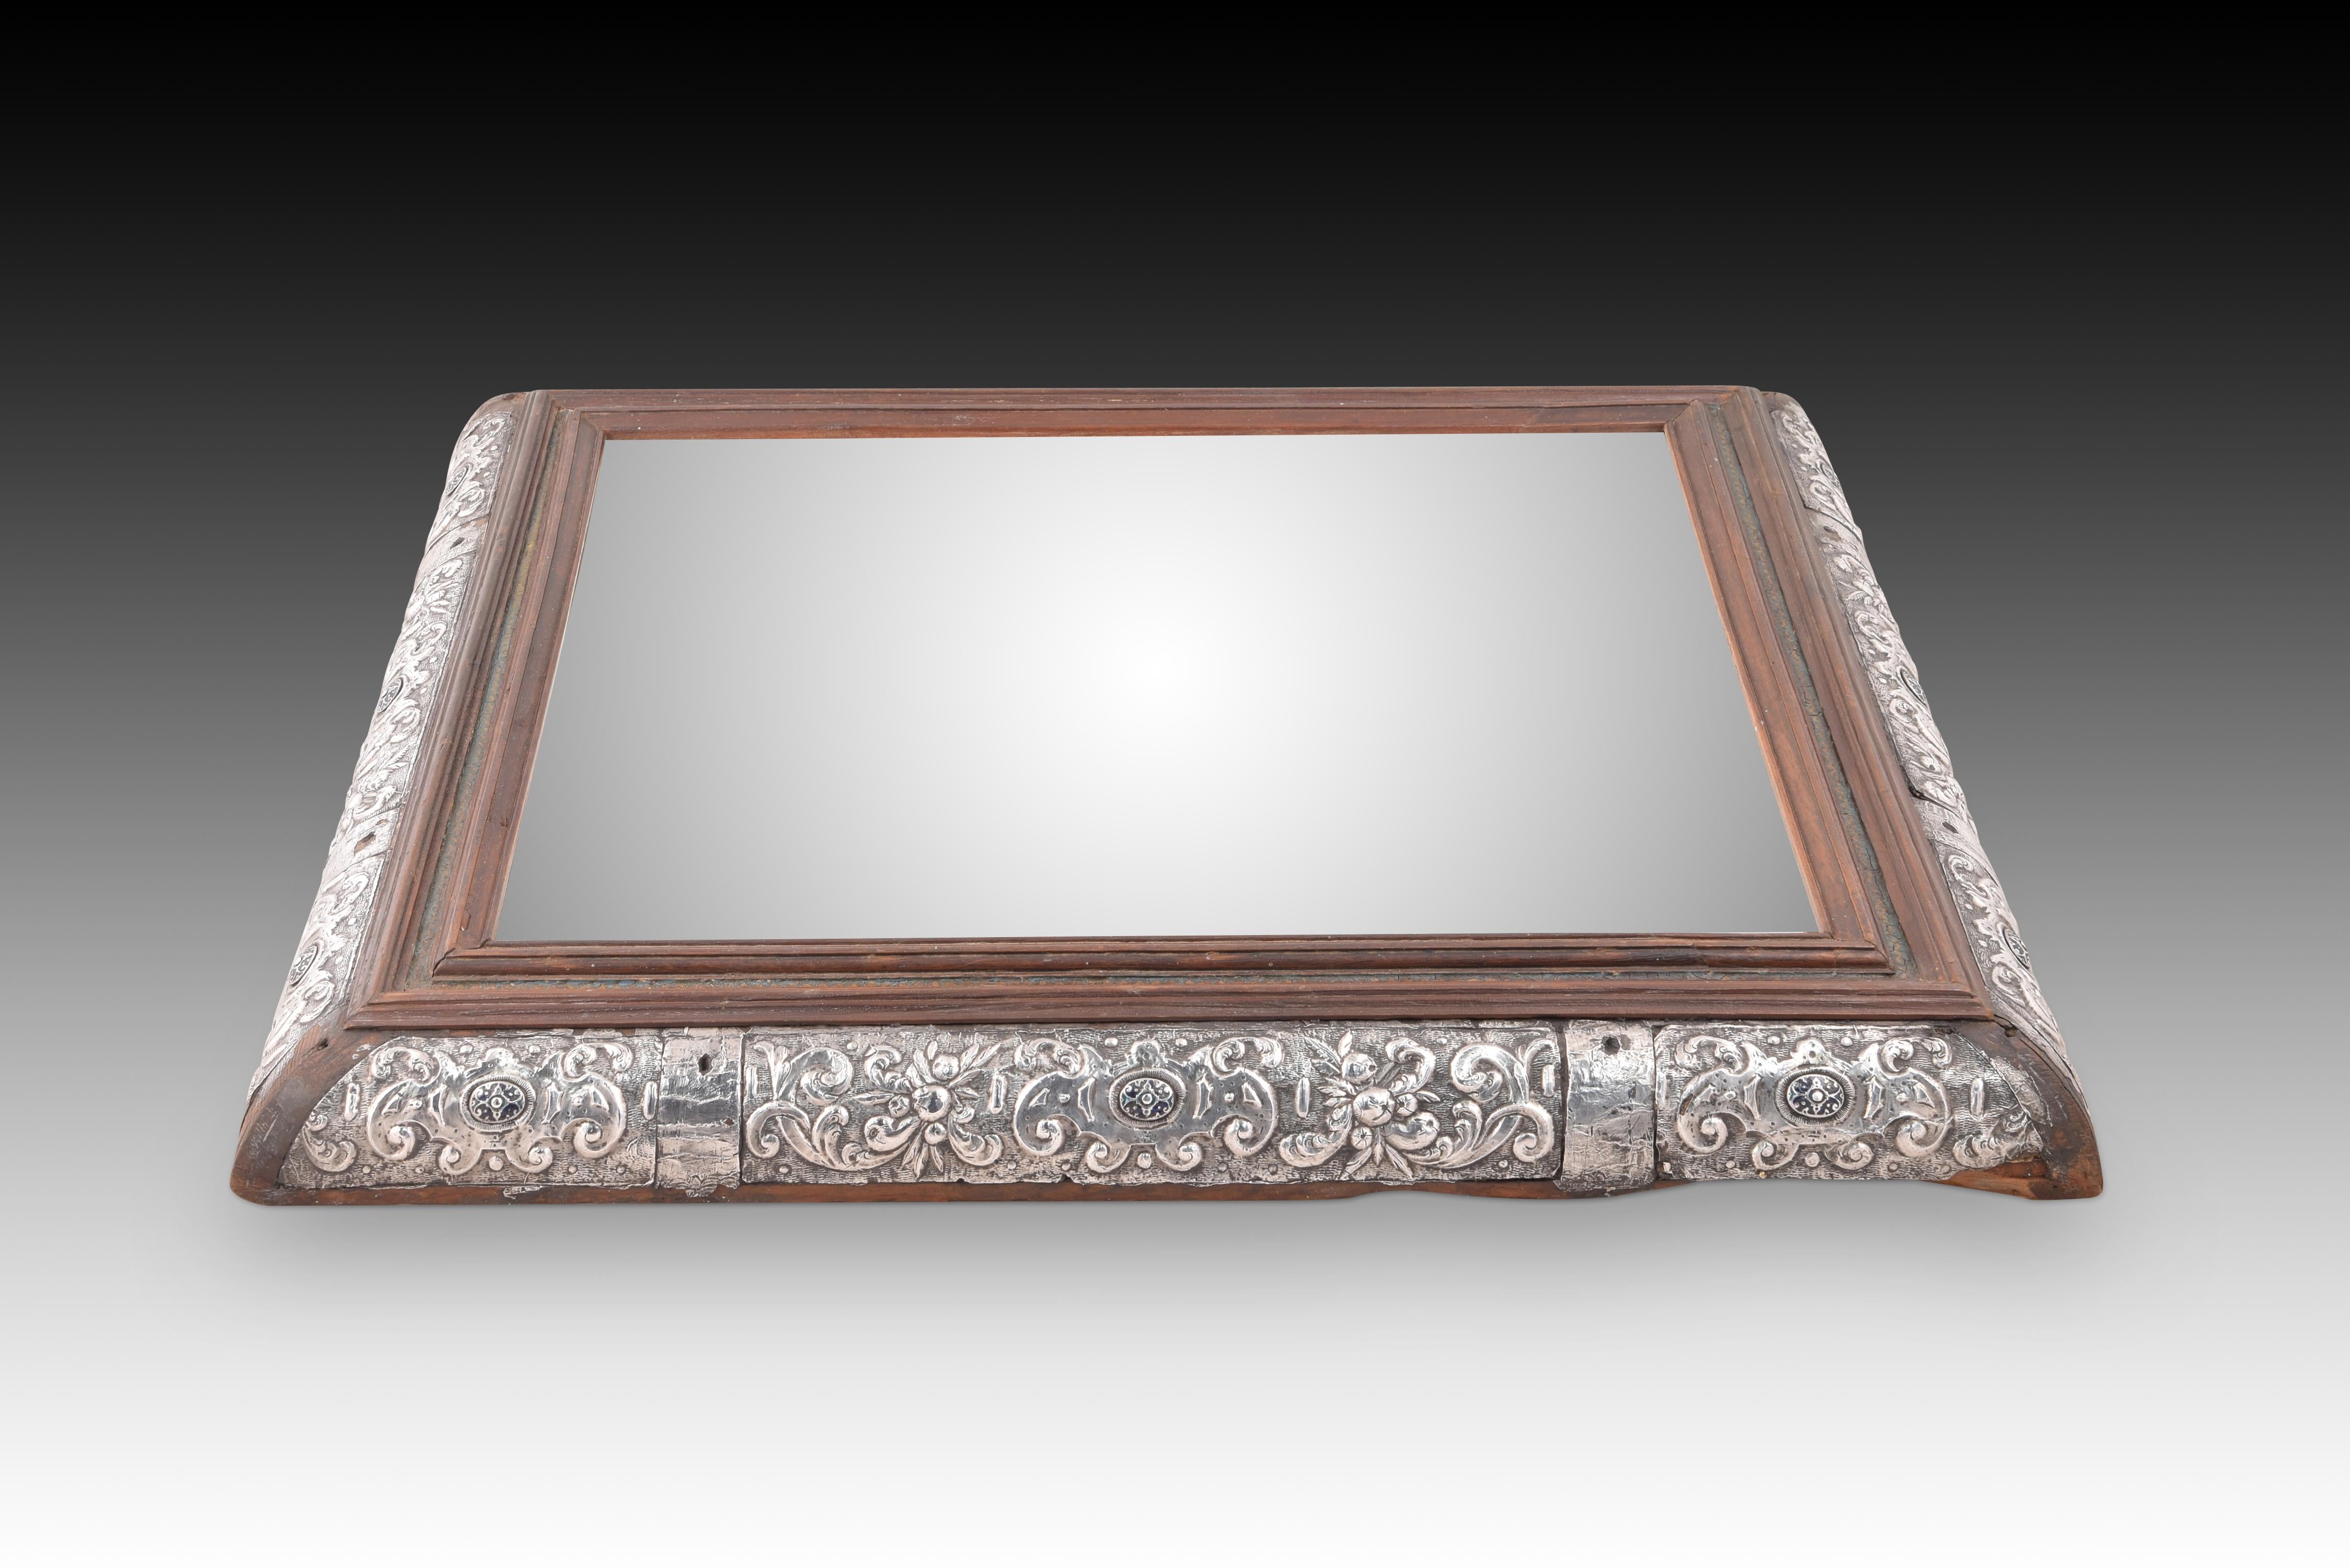 Mirror with cabochon frame. Silver, enamel, wood, stucco, etc. Mexican school, 17th century.
 No contrast marks. It has faults. 
Mirror with a slightly rectangular frame made of wood with polychrome areas and an embossed silver plating on stucco and